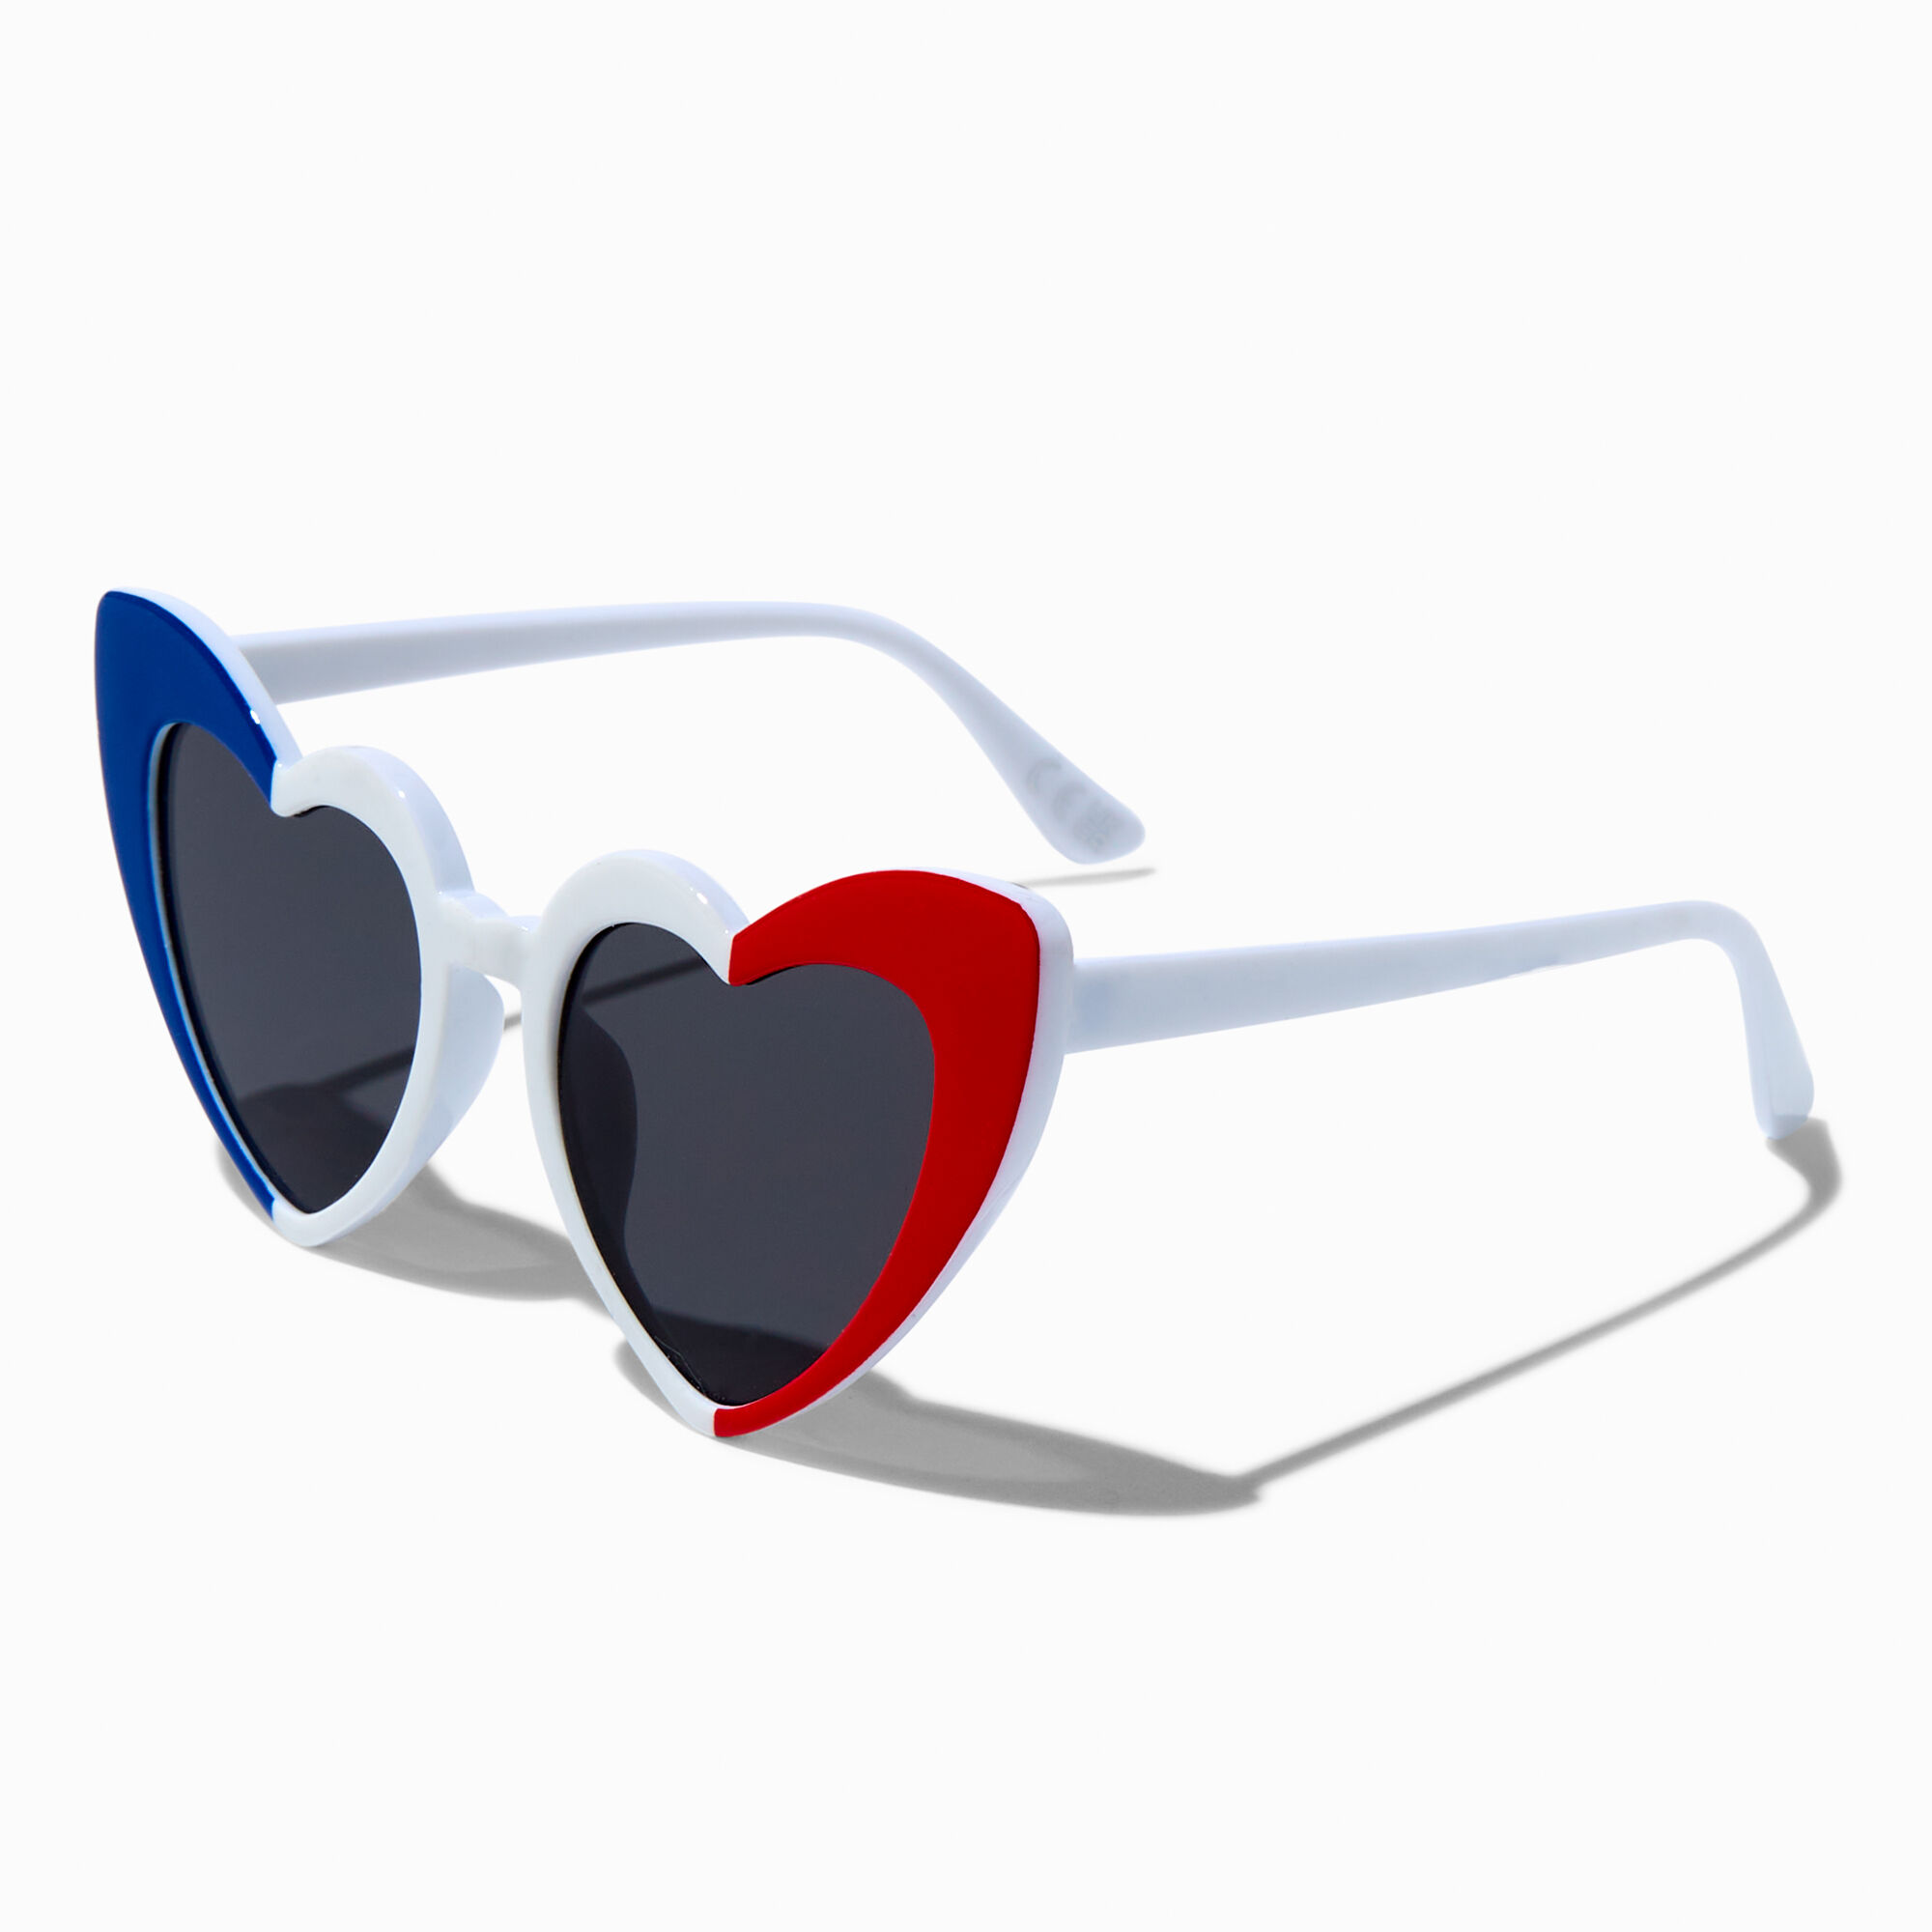 View Claires Red White Heart Frame Sunglasses Blue information